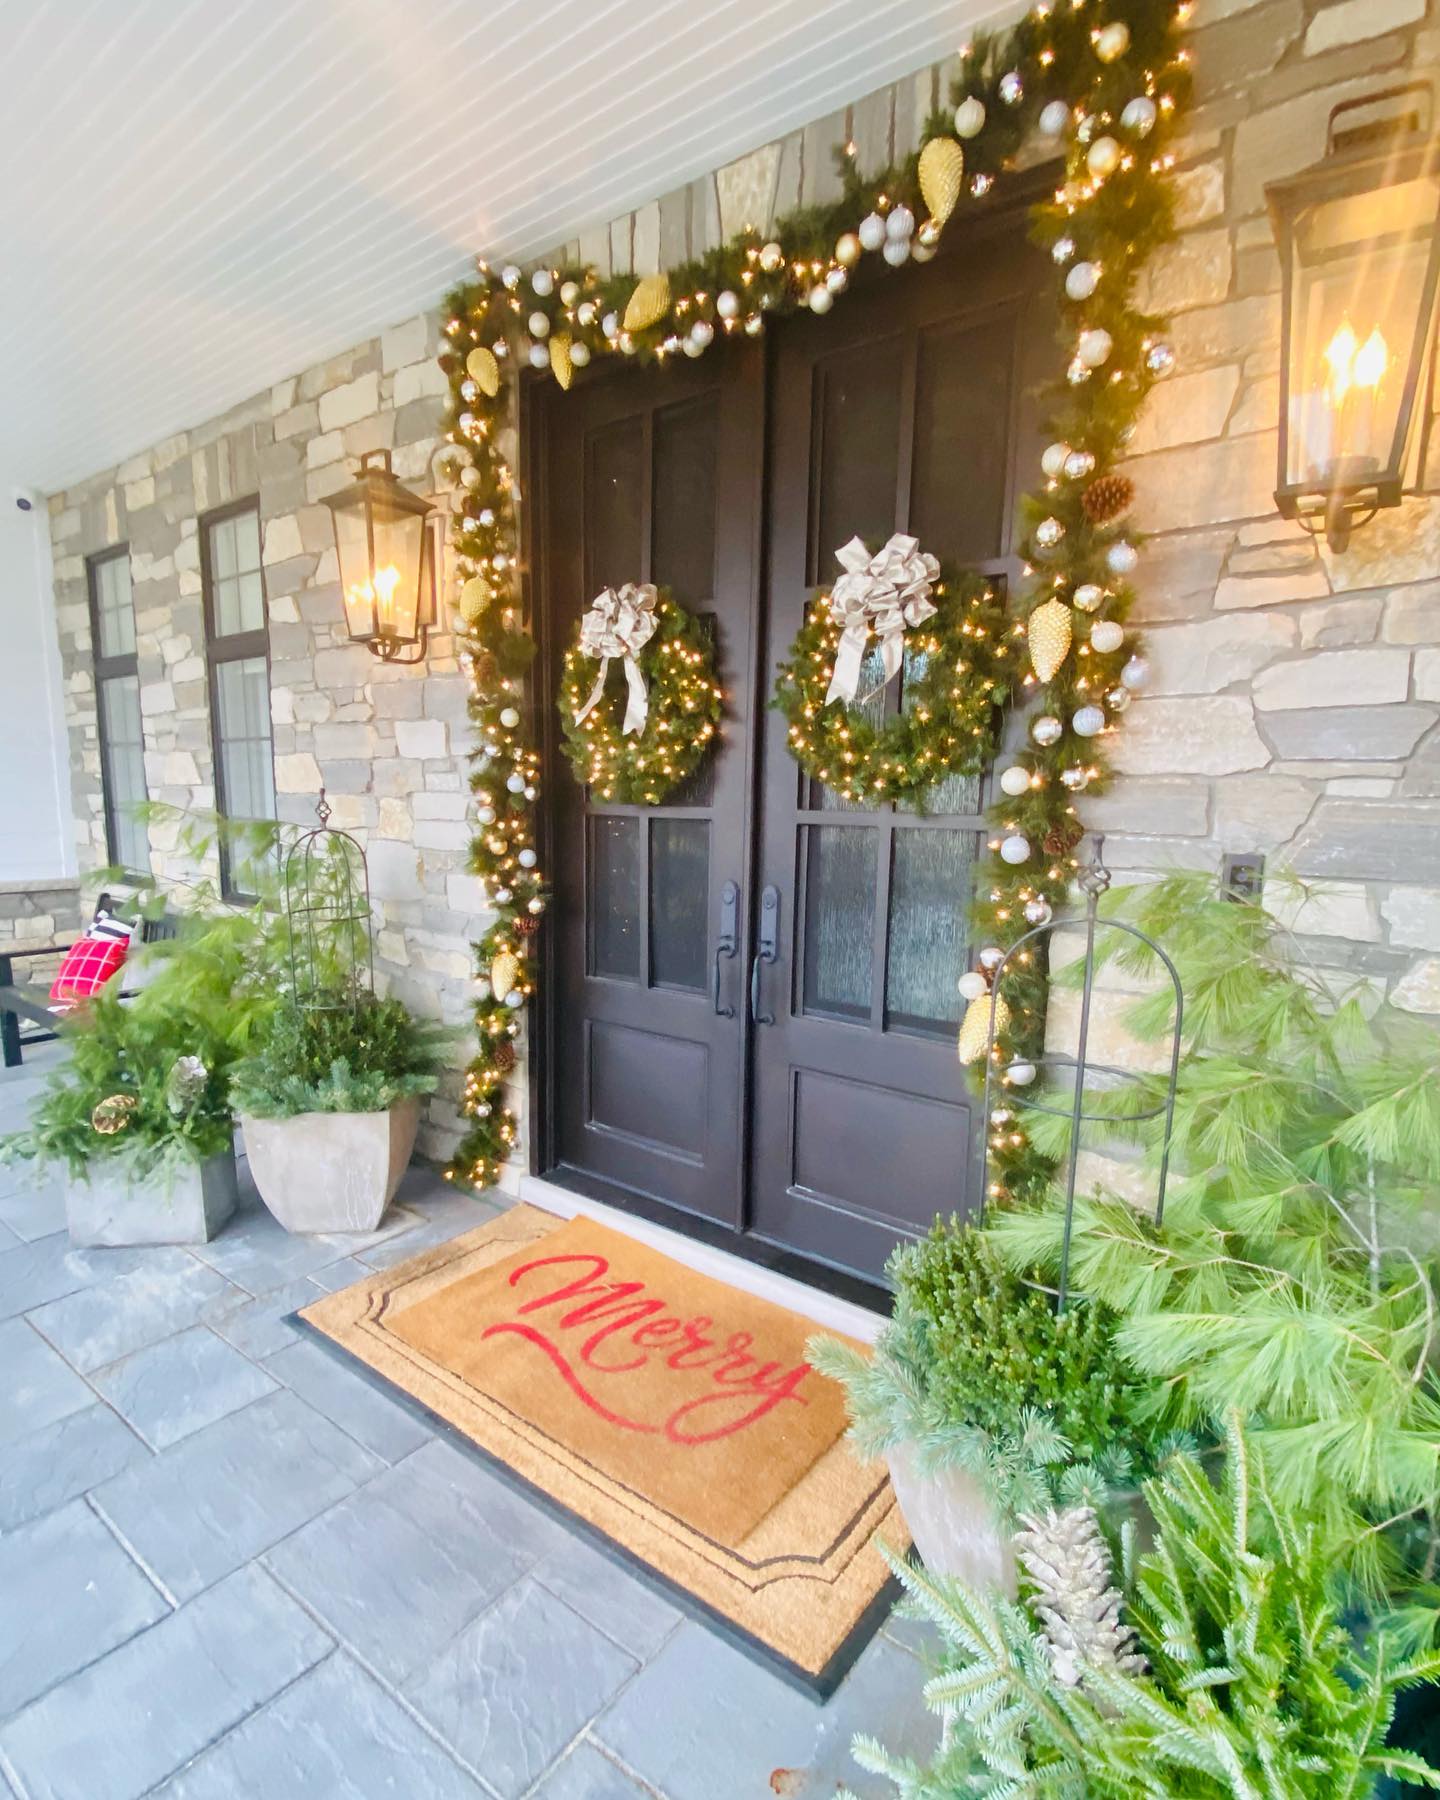 Holiday Home Tour Frankenmuth Women's Club